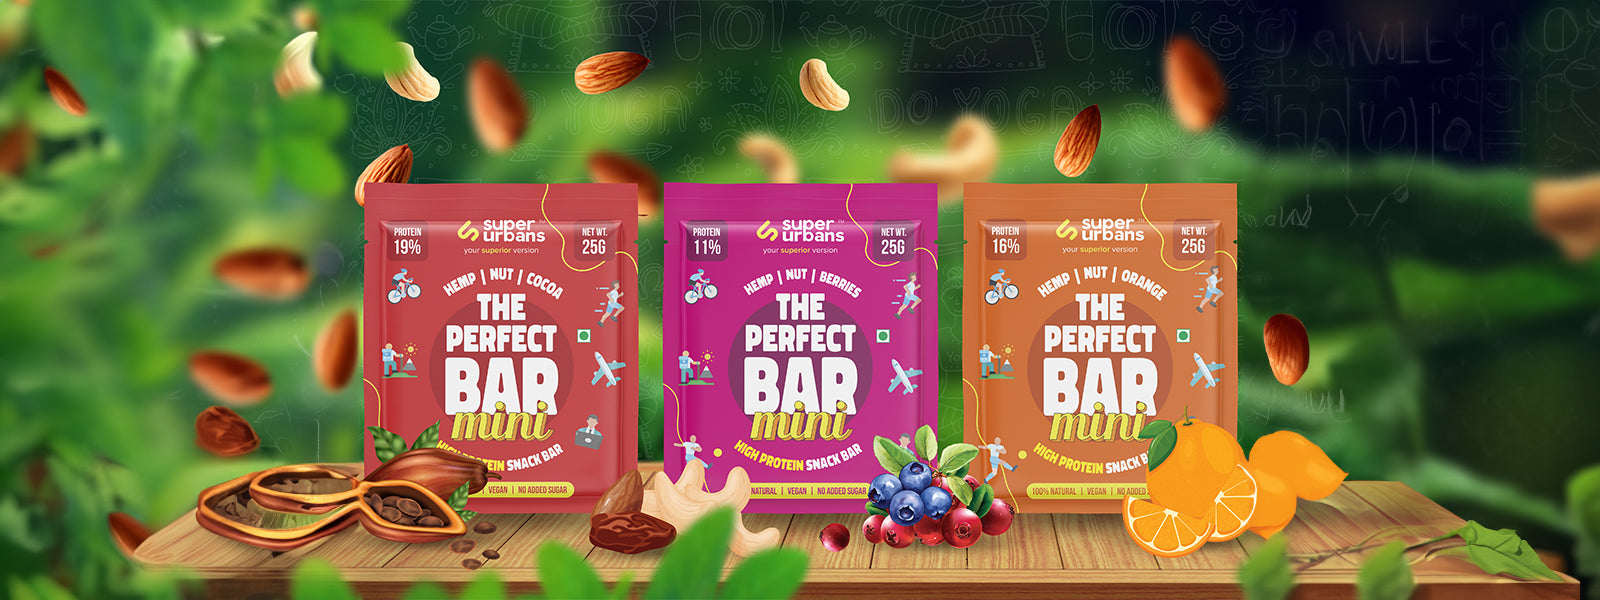 Super Urbans-Top Vegan Protein Bars for Healthy Snacking